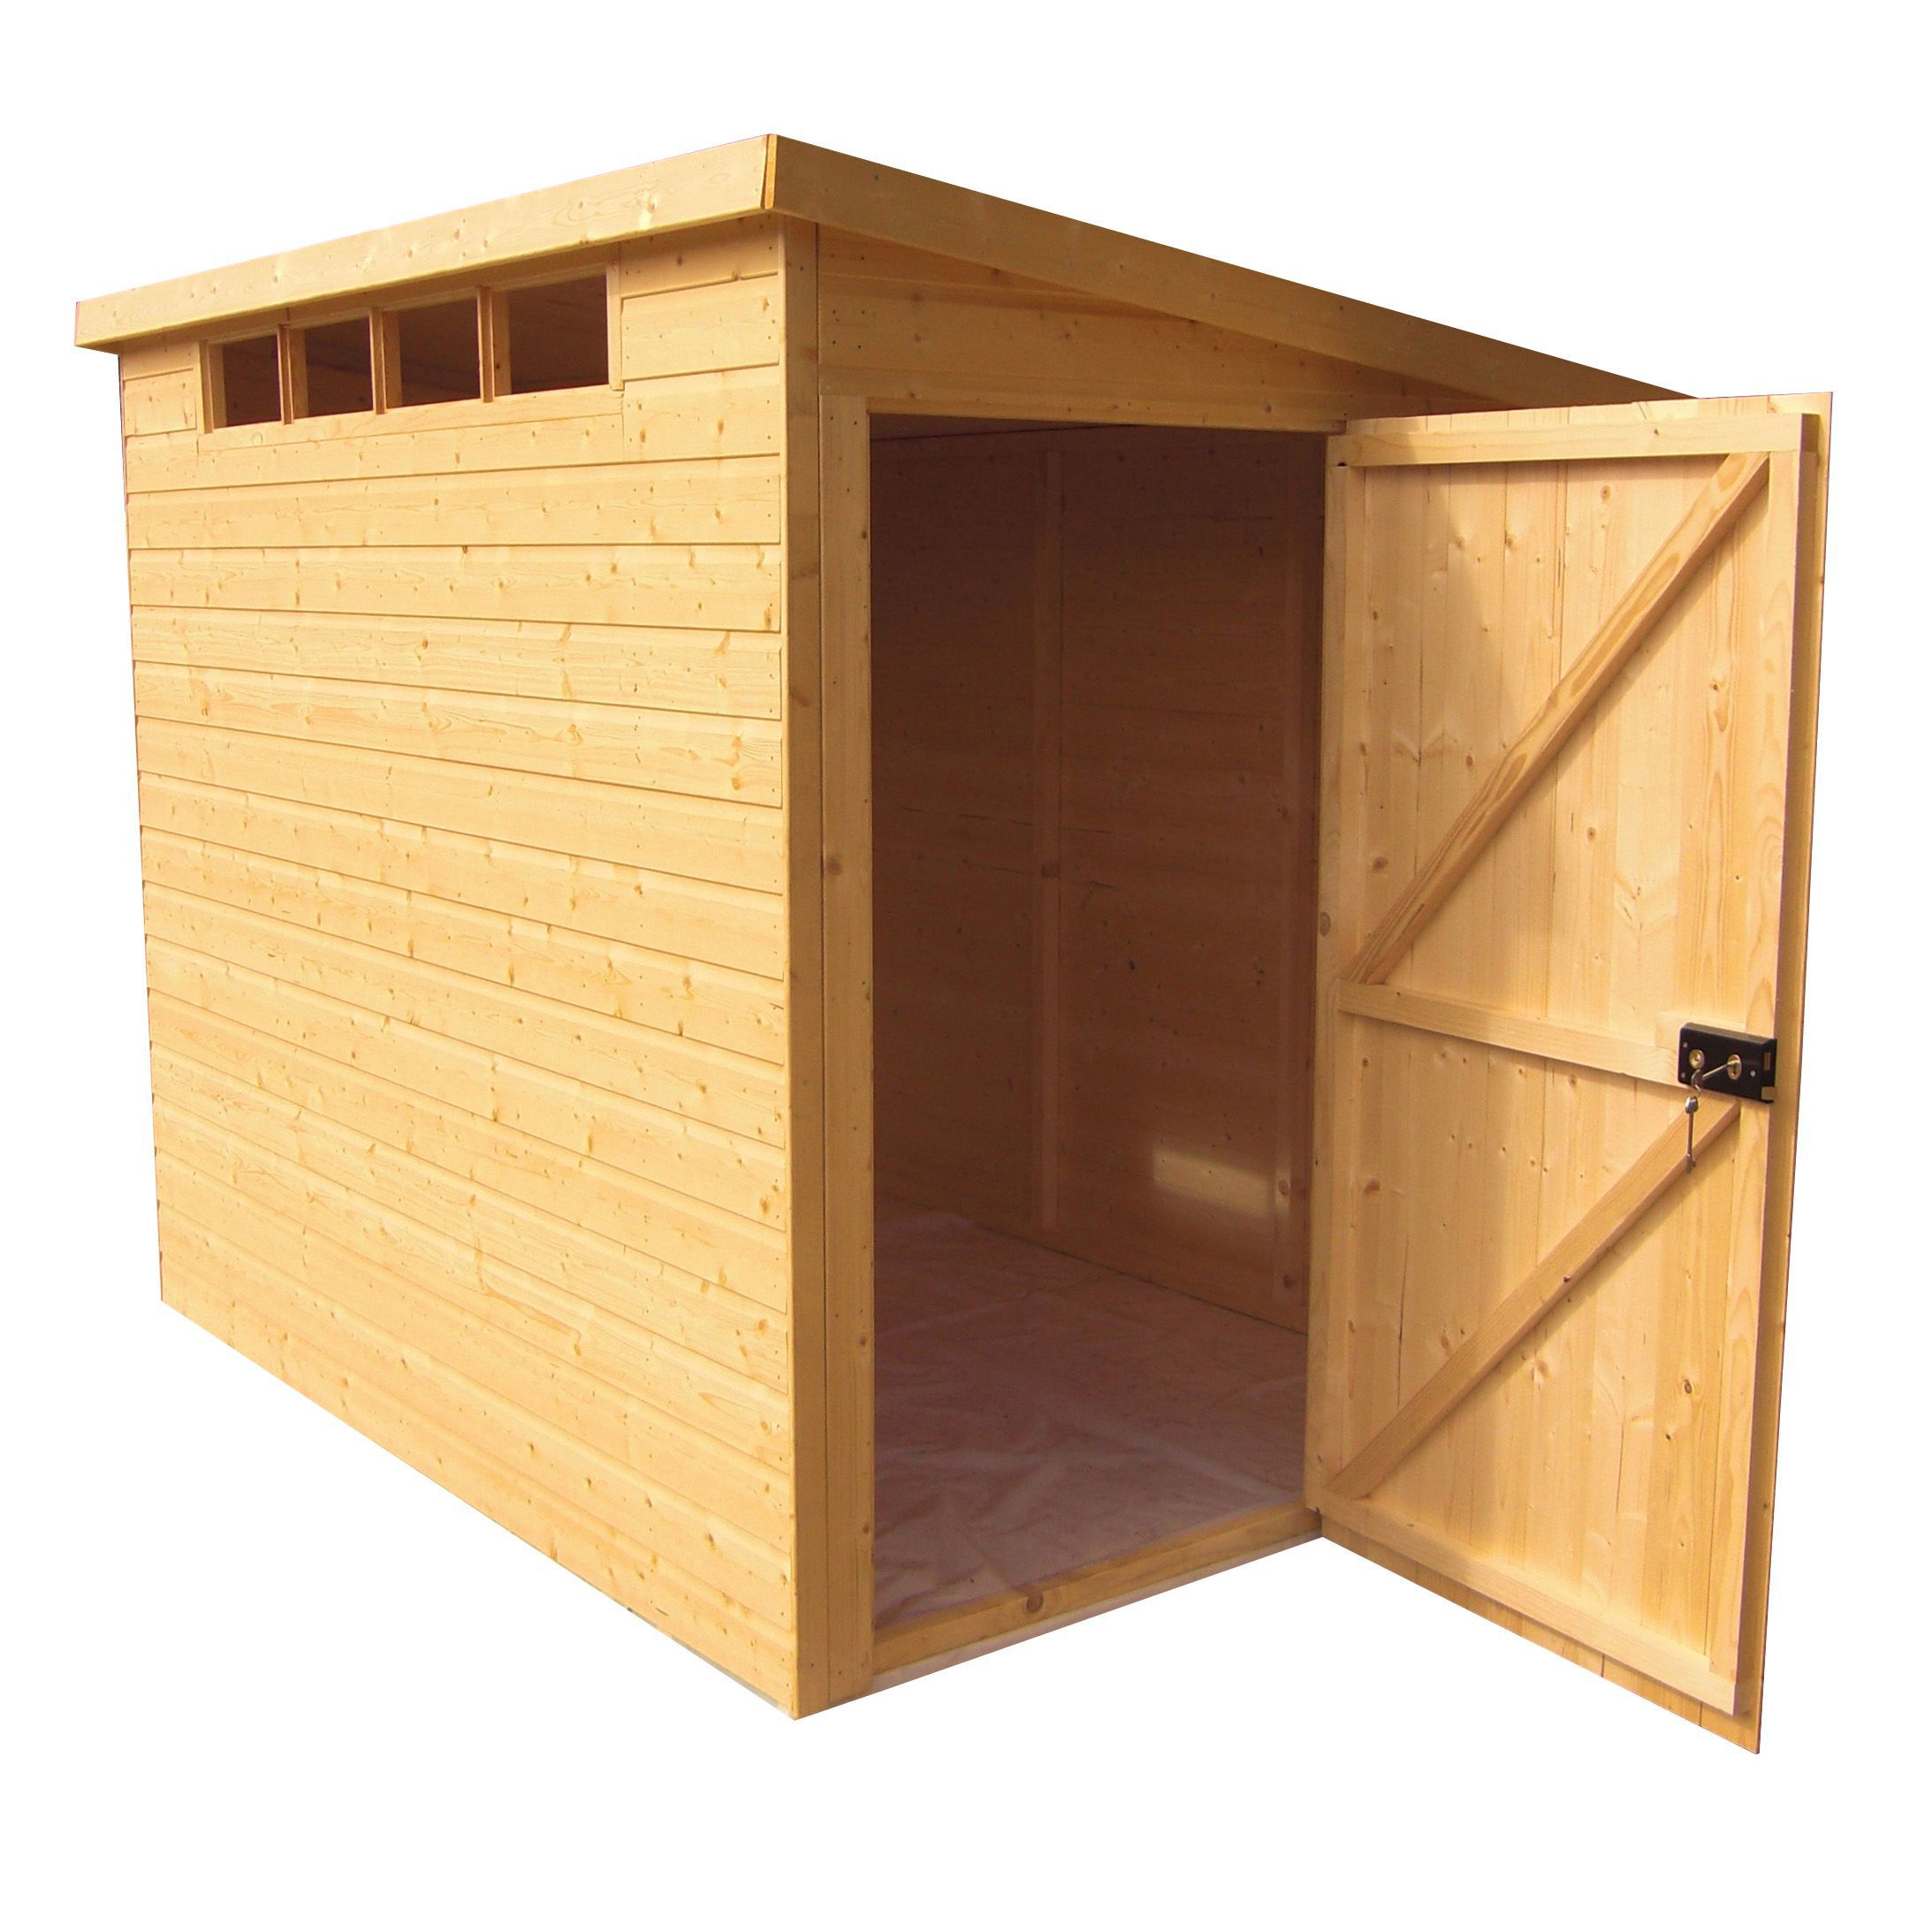 Shire 10x10 Pent Shed - Base not includedAssembly required